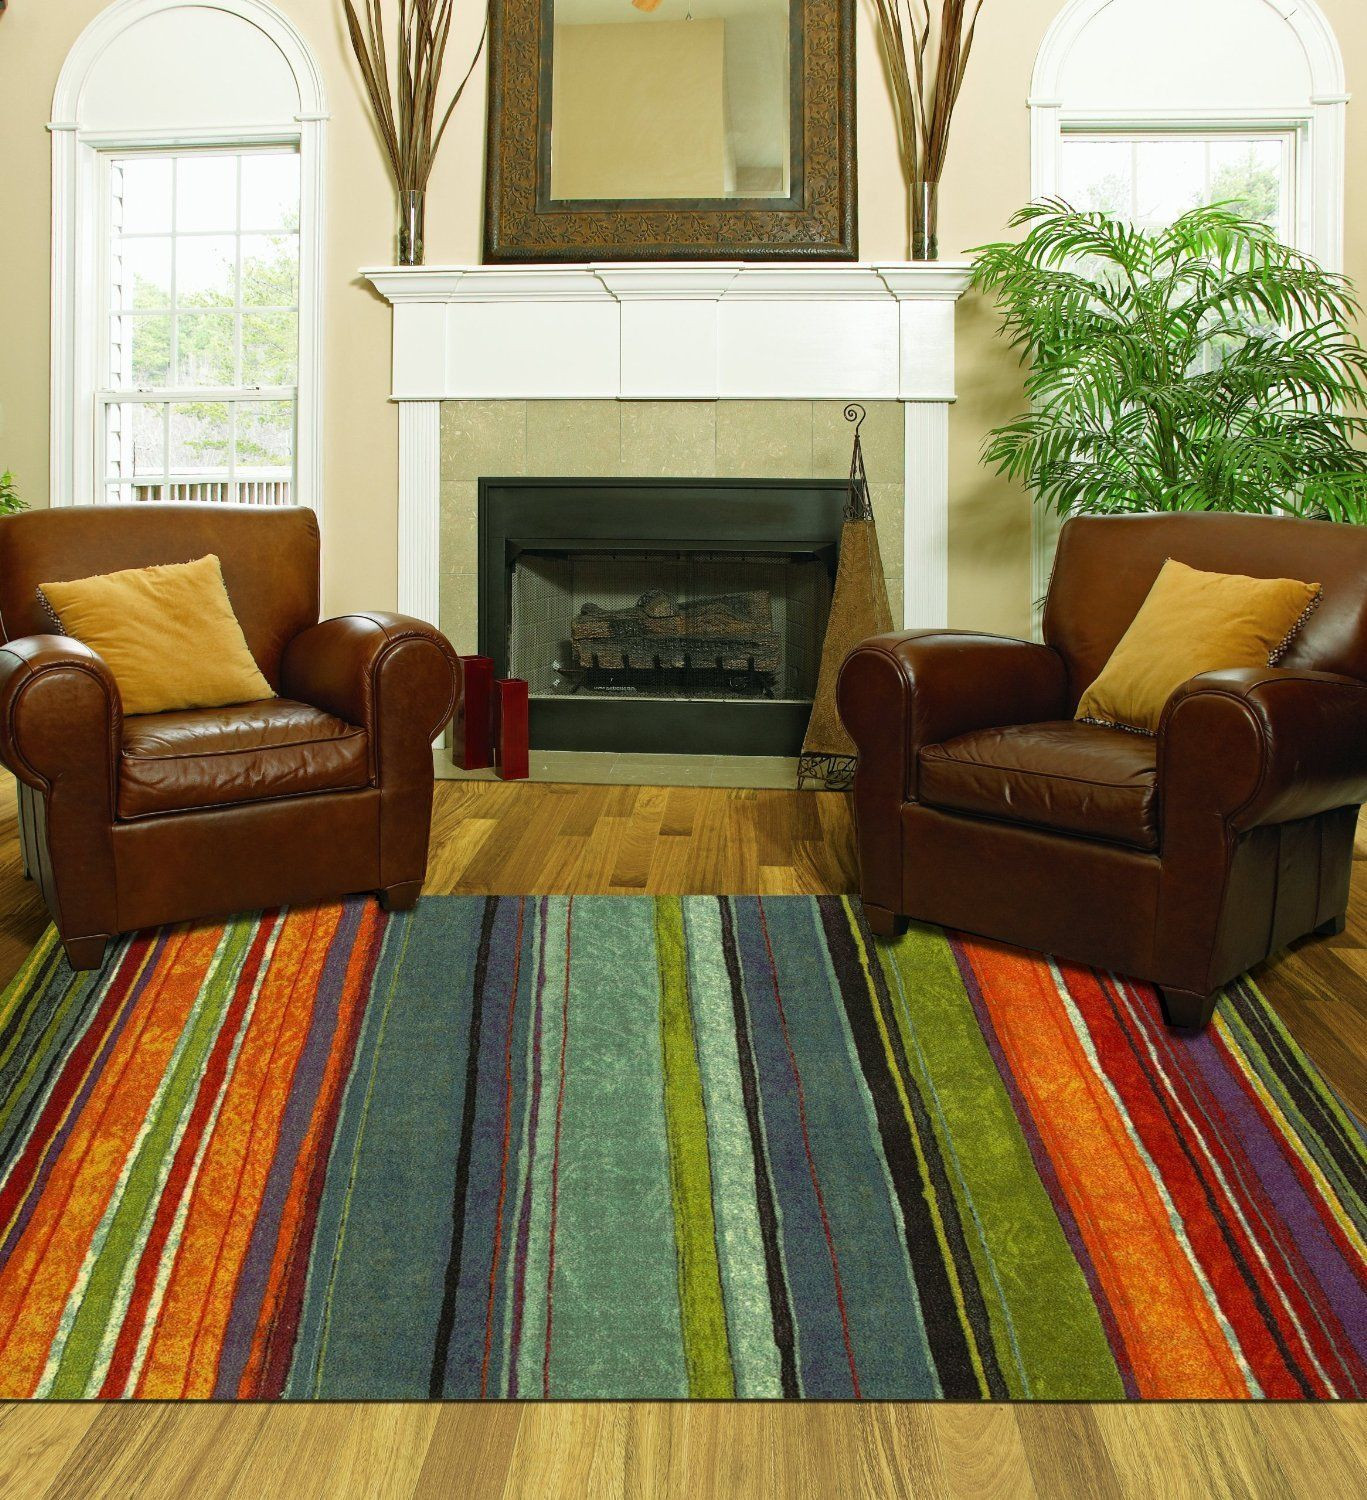 Big Living Room Rugs
 Area Rug Colorful 8x10 Living Room Size Carpet Home